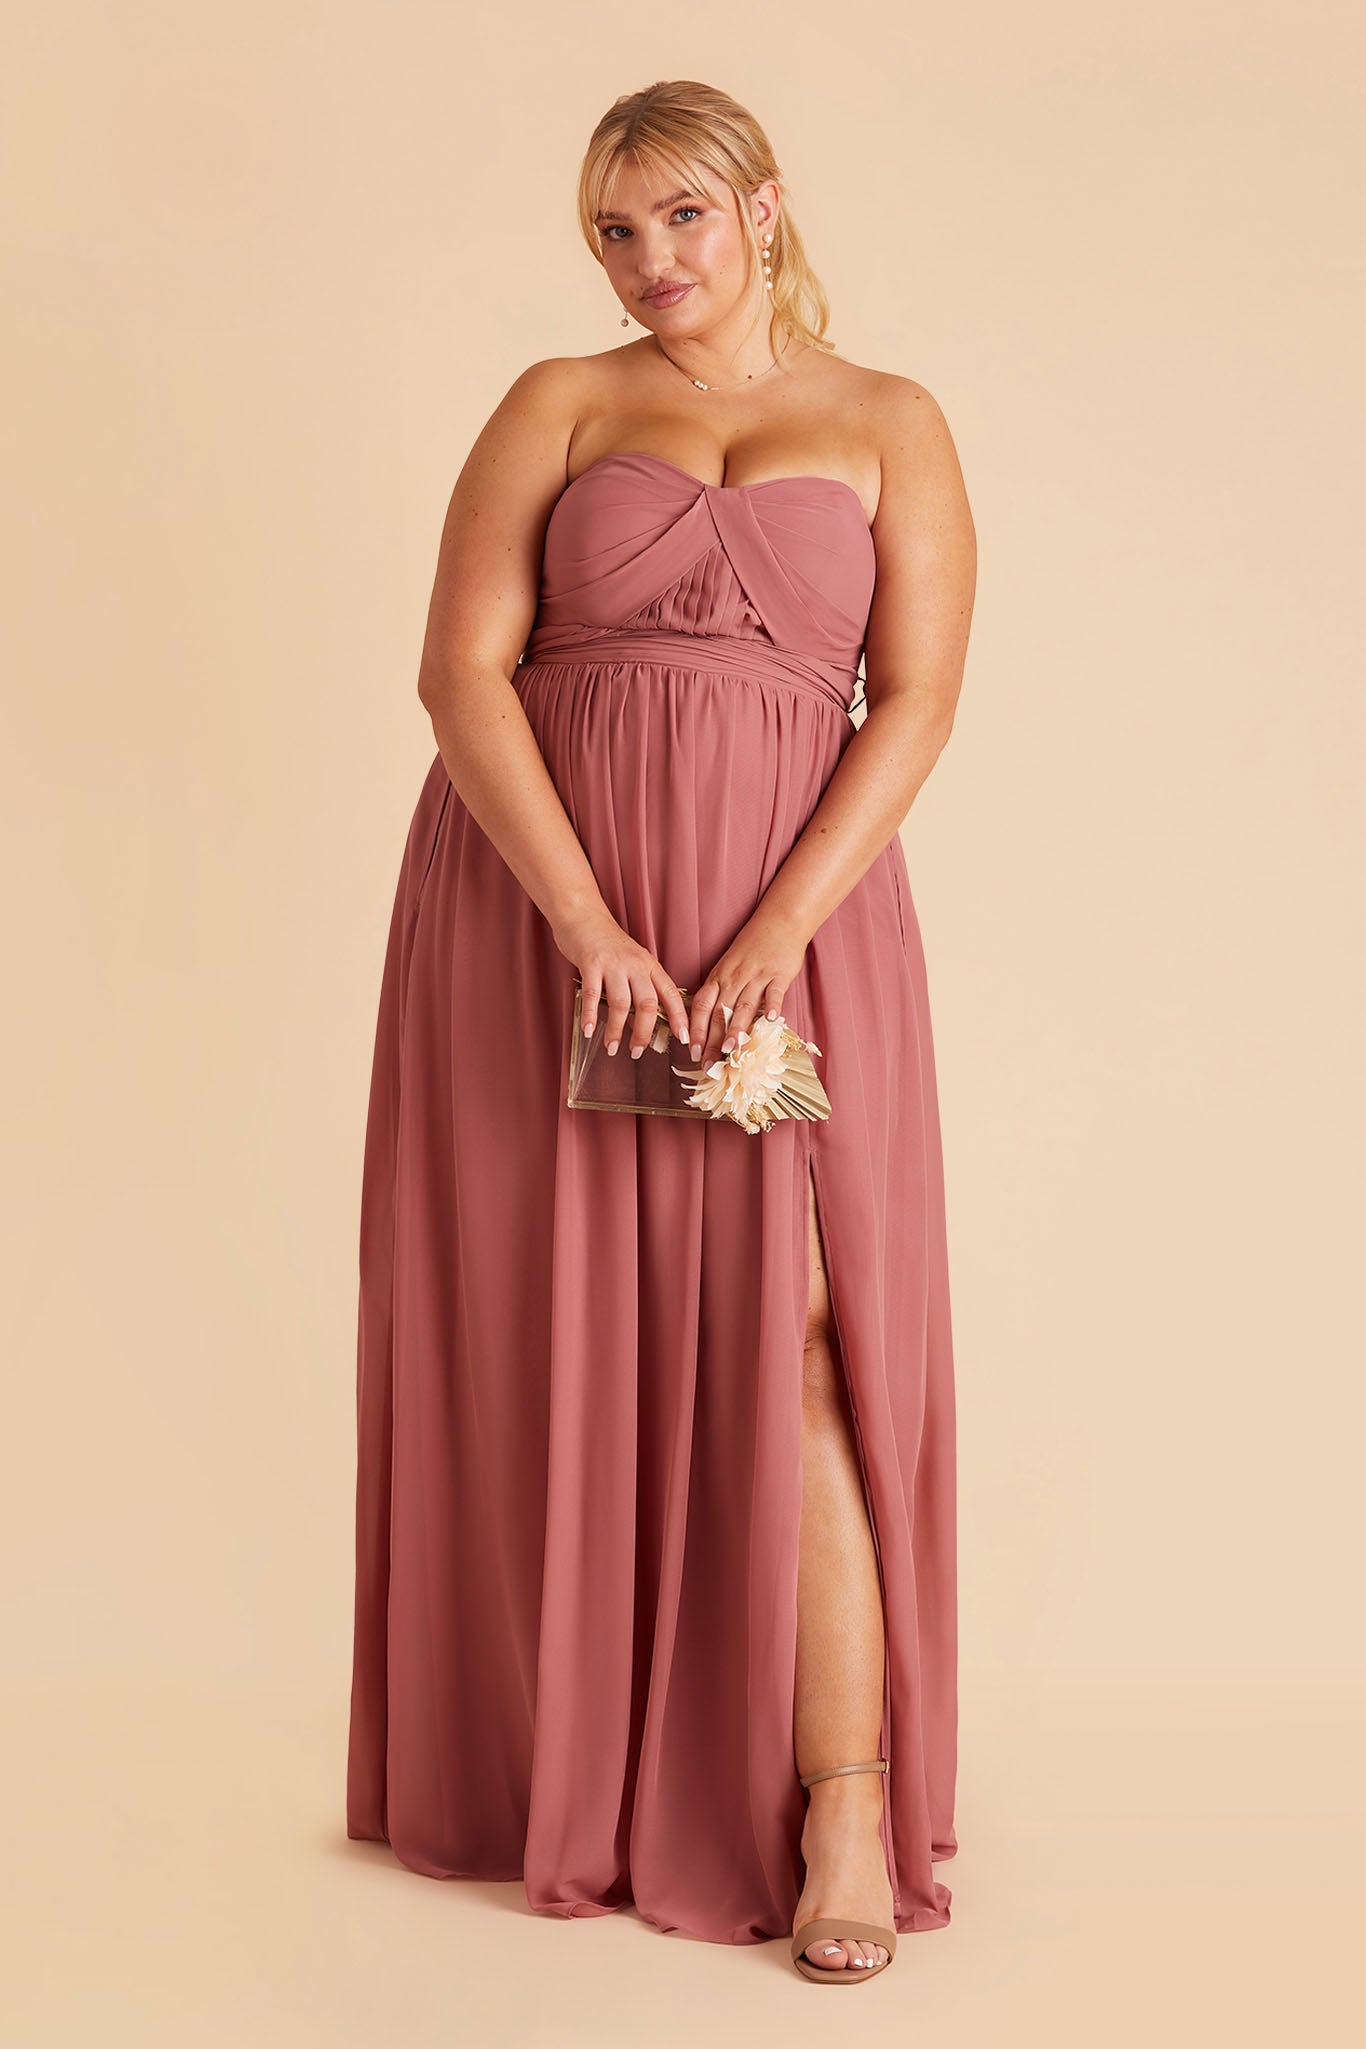 Grace plus size convertible bridesmaid dress in Mulberry Chiffon by Birdy Grey, front view